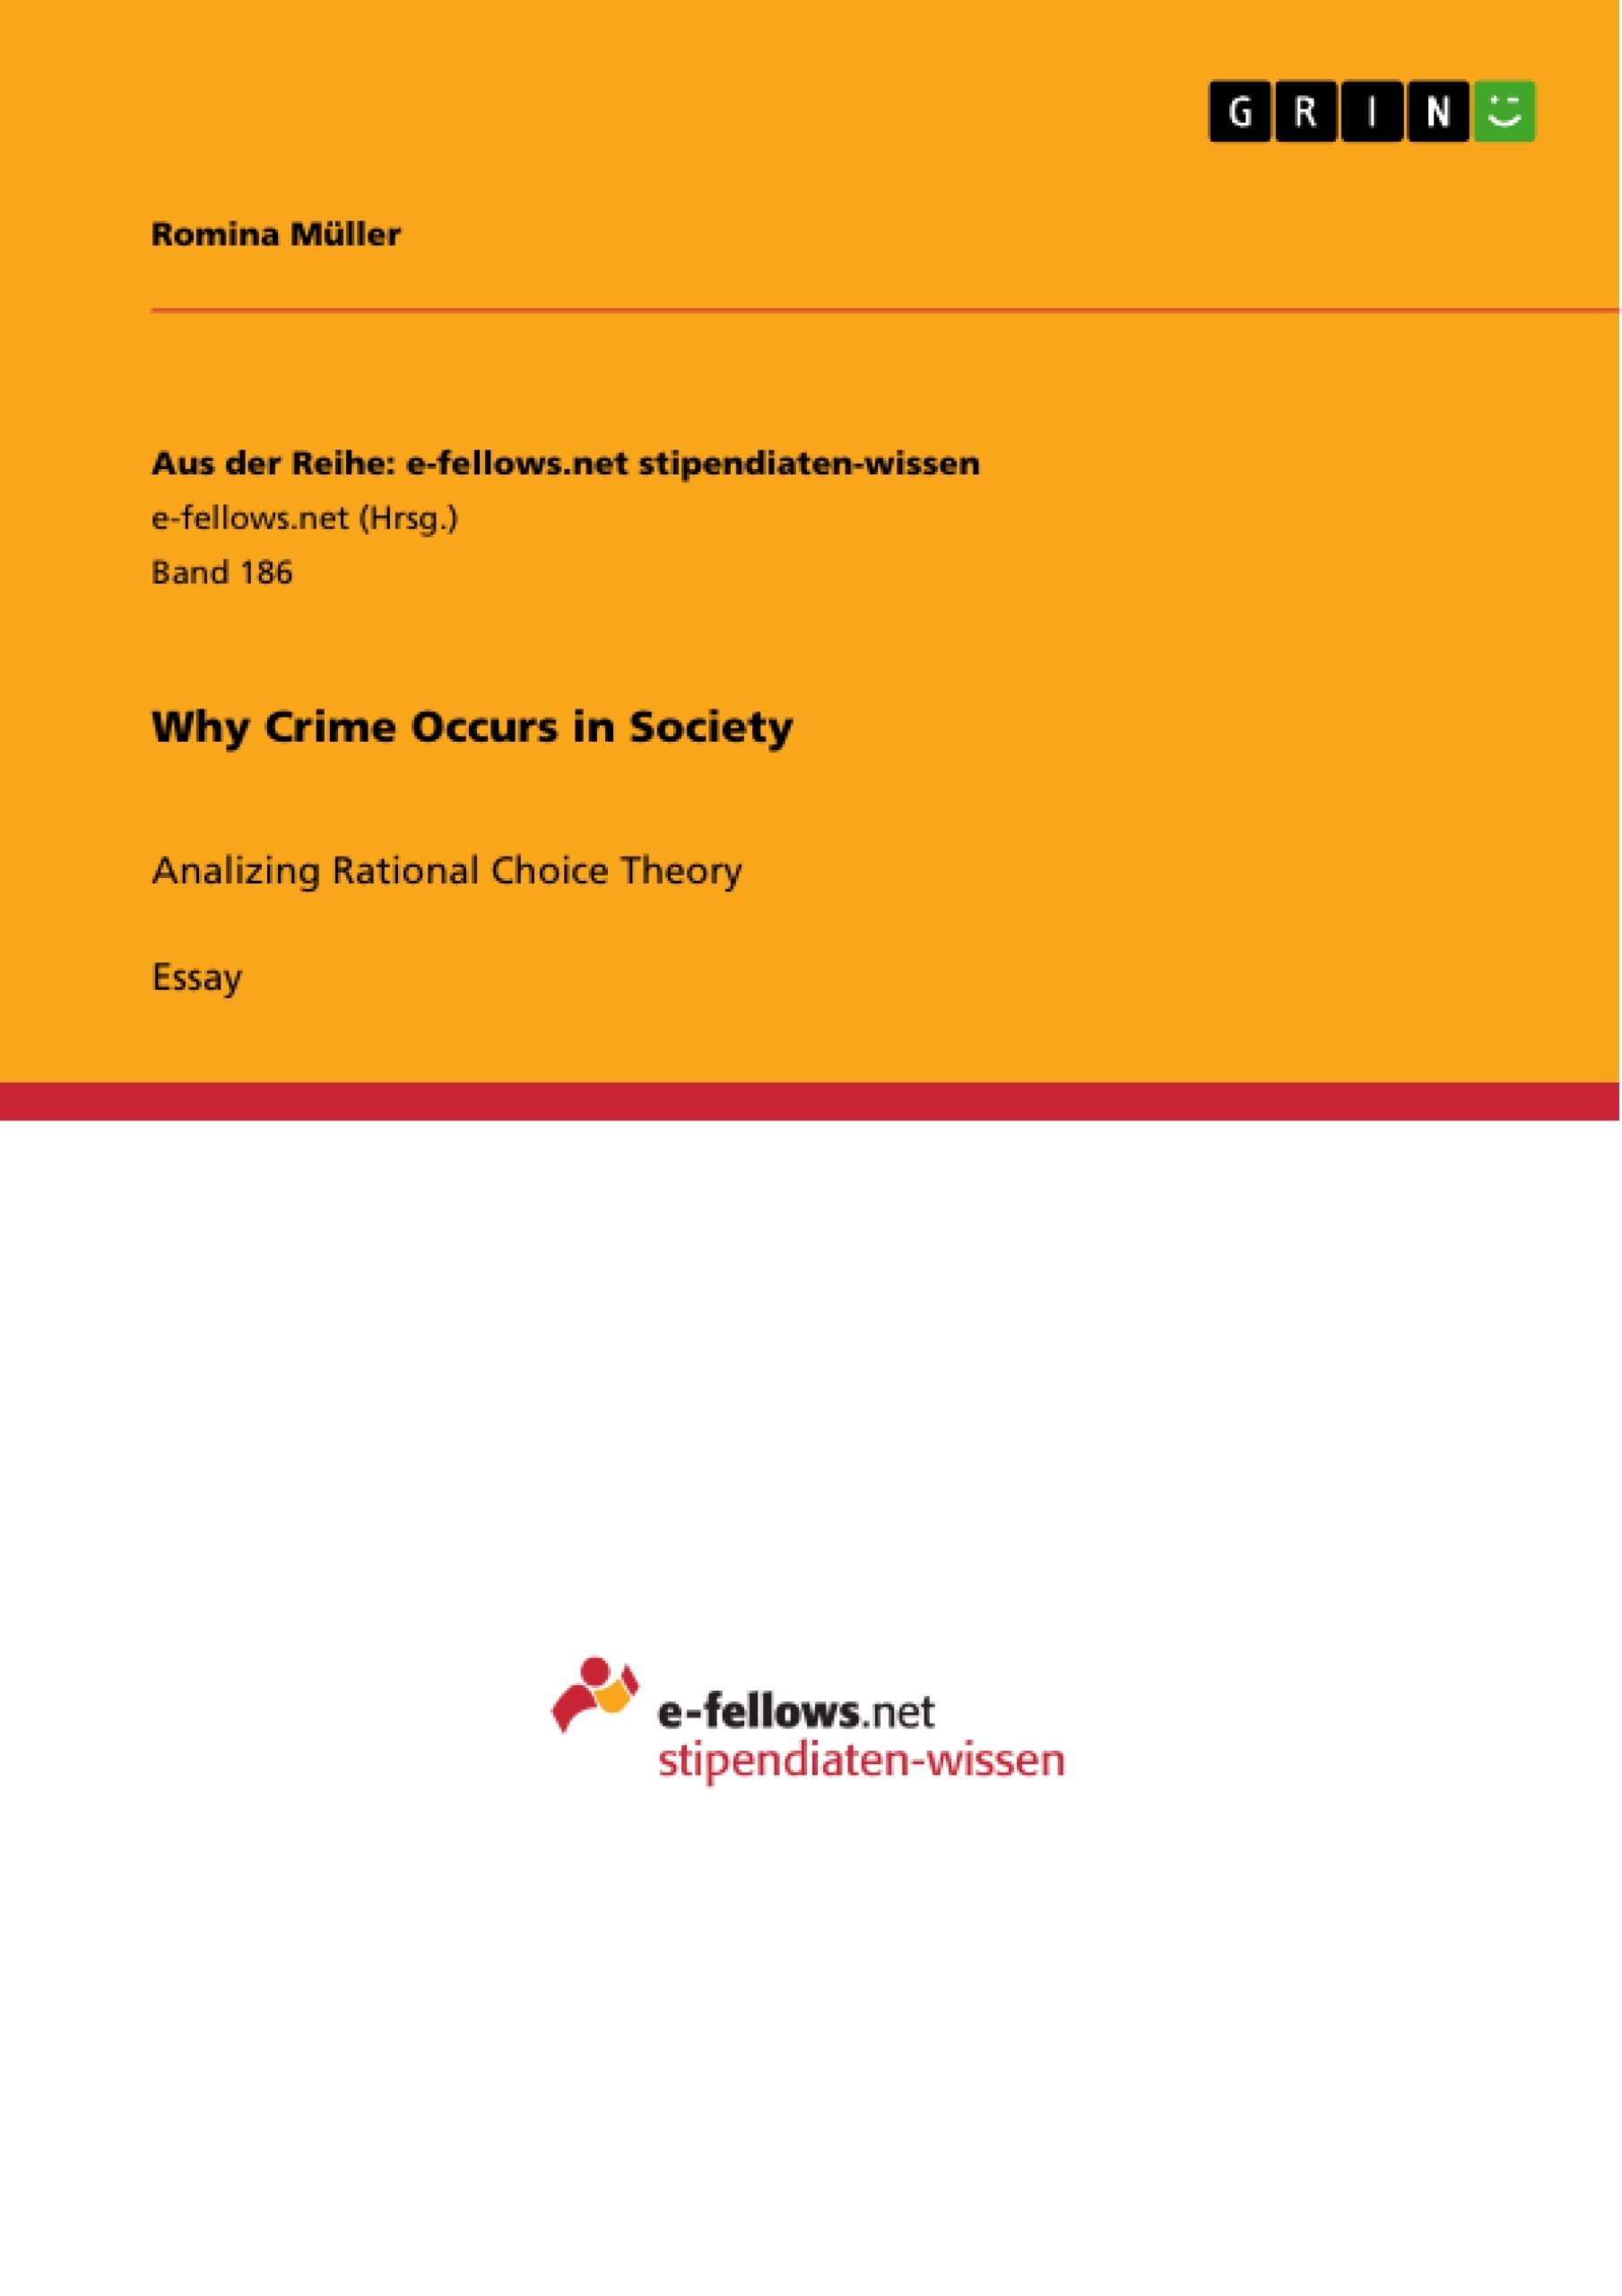 Title: Why Crime Occurs in Society